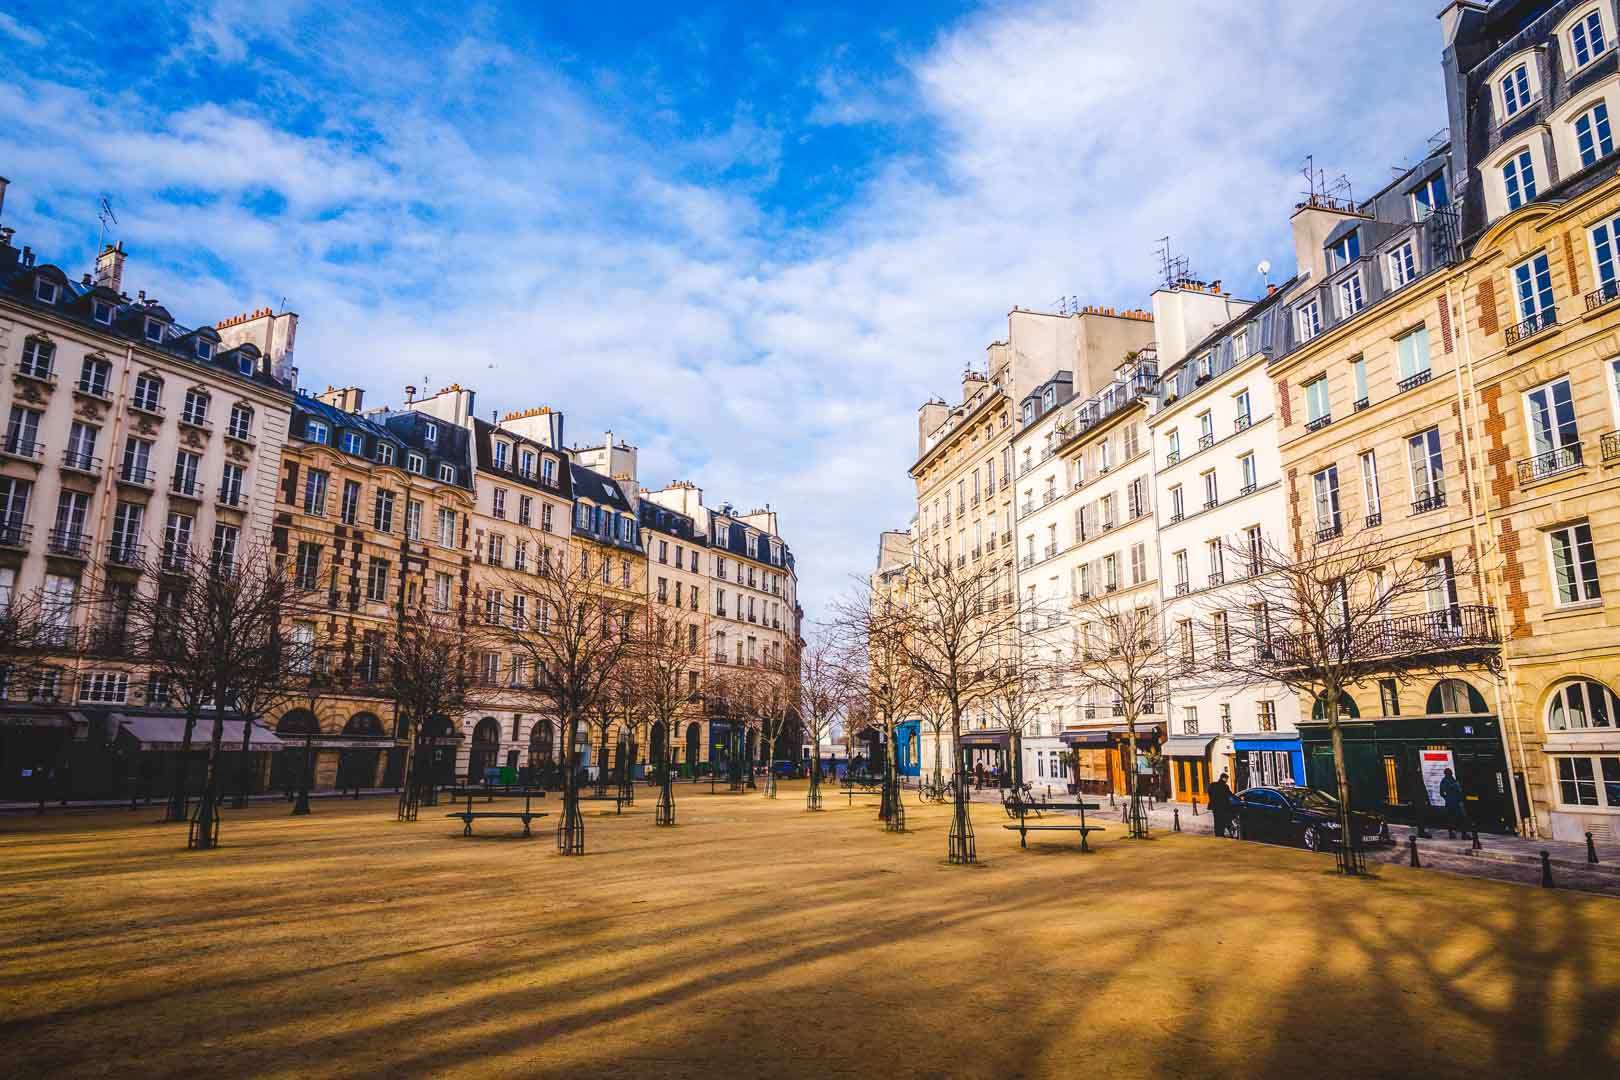 Place Dauphine – Escape the Hustle of the City